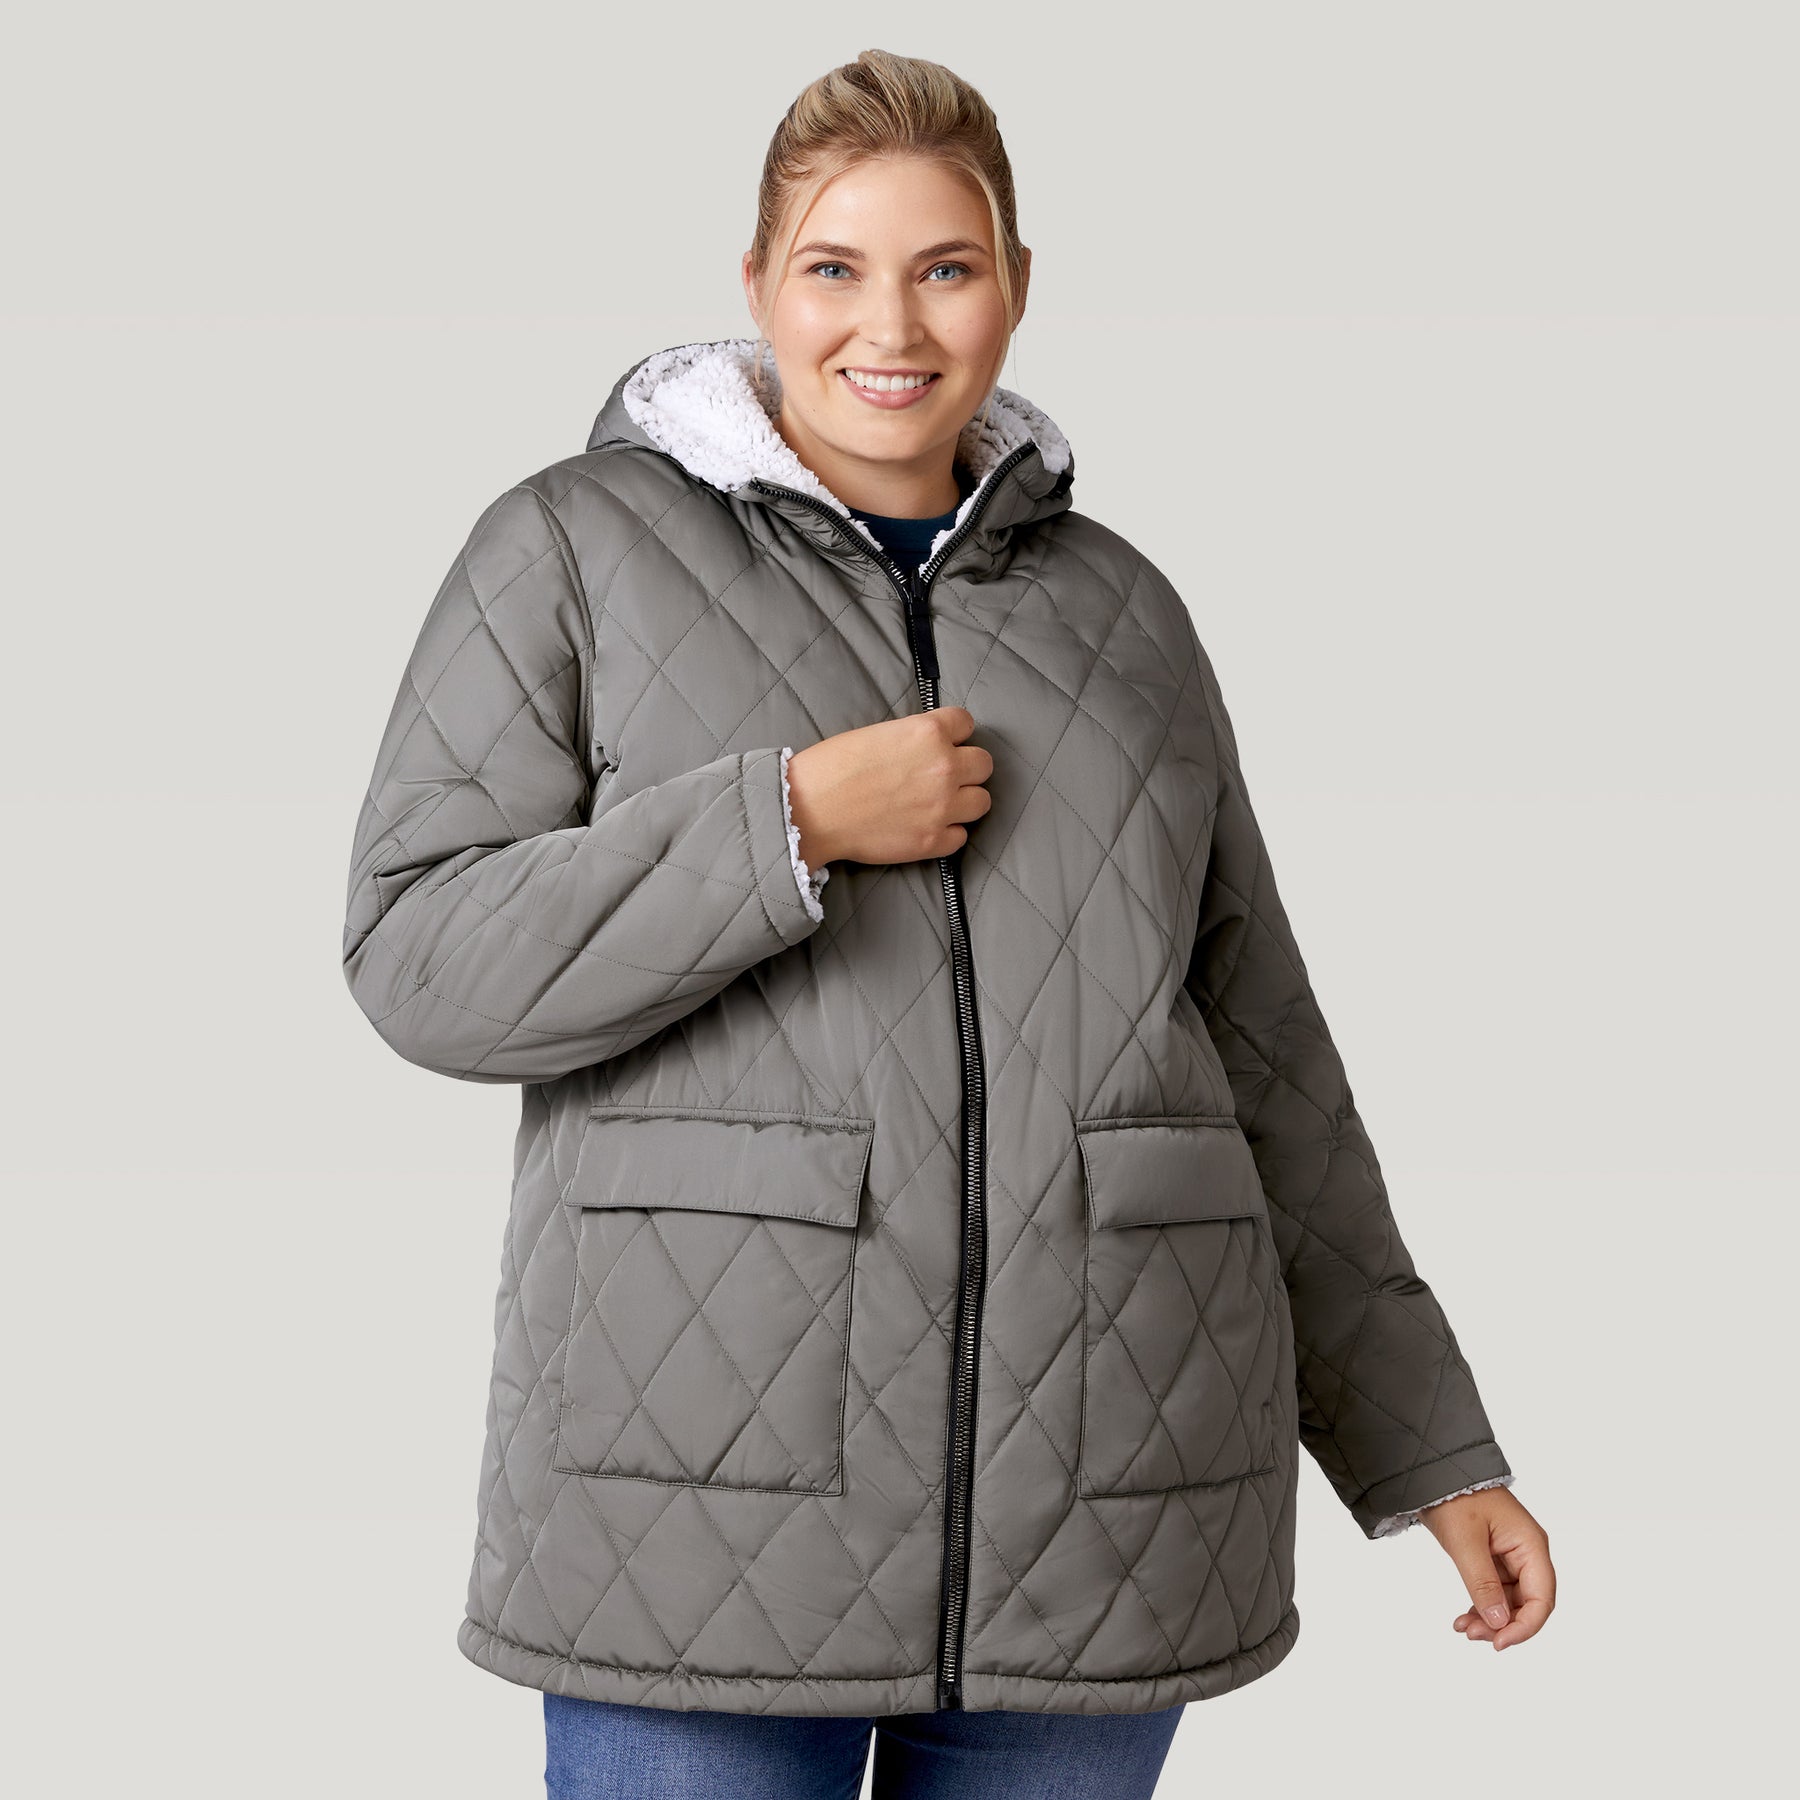 Plus Size - Women's Quilted Jacket - Blue - 1XL - The Vermont Country Store